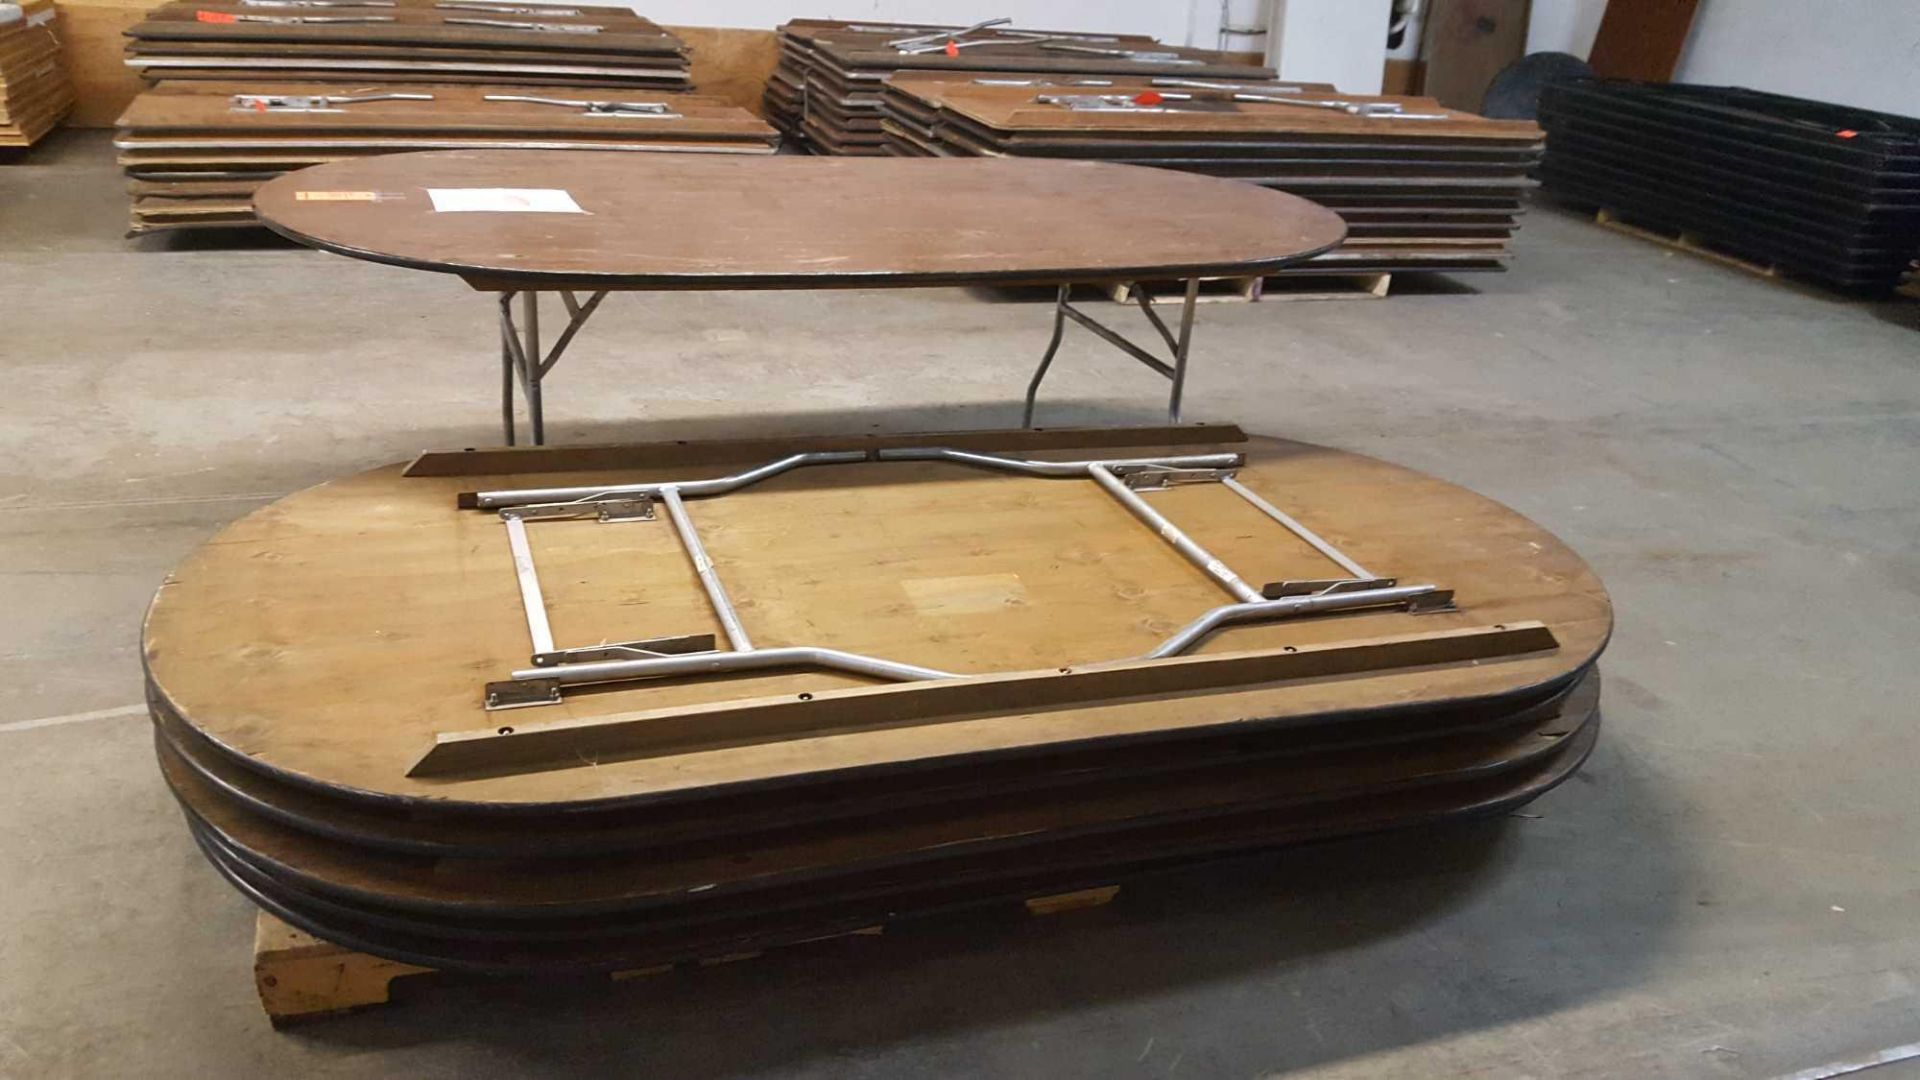 Lot of (6) Palmer racetrack tables, oval 84 inch by 48 inch by 30 in, with folding legs. - Bild 3 aus 4